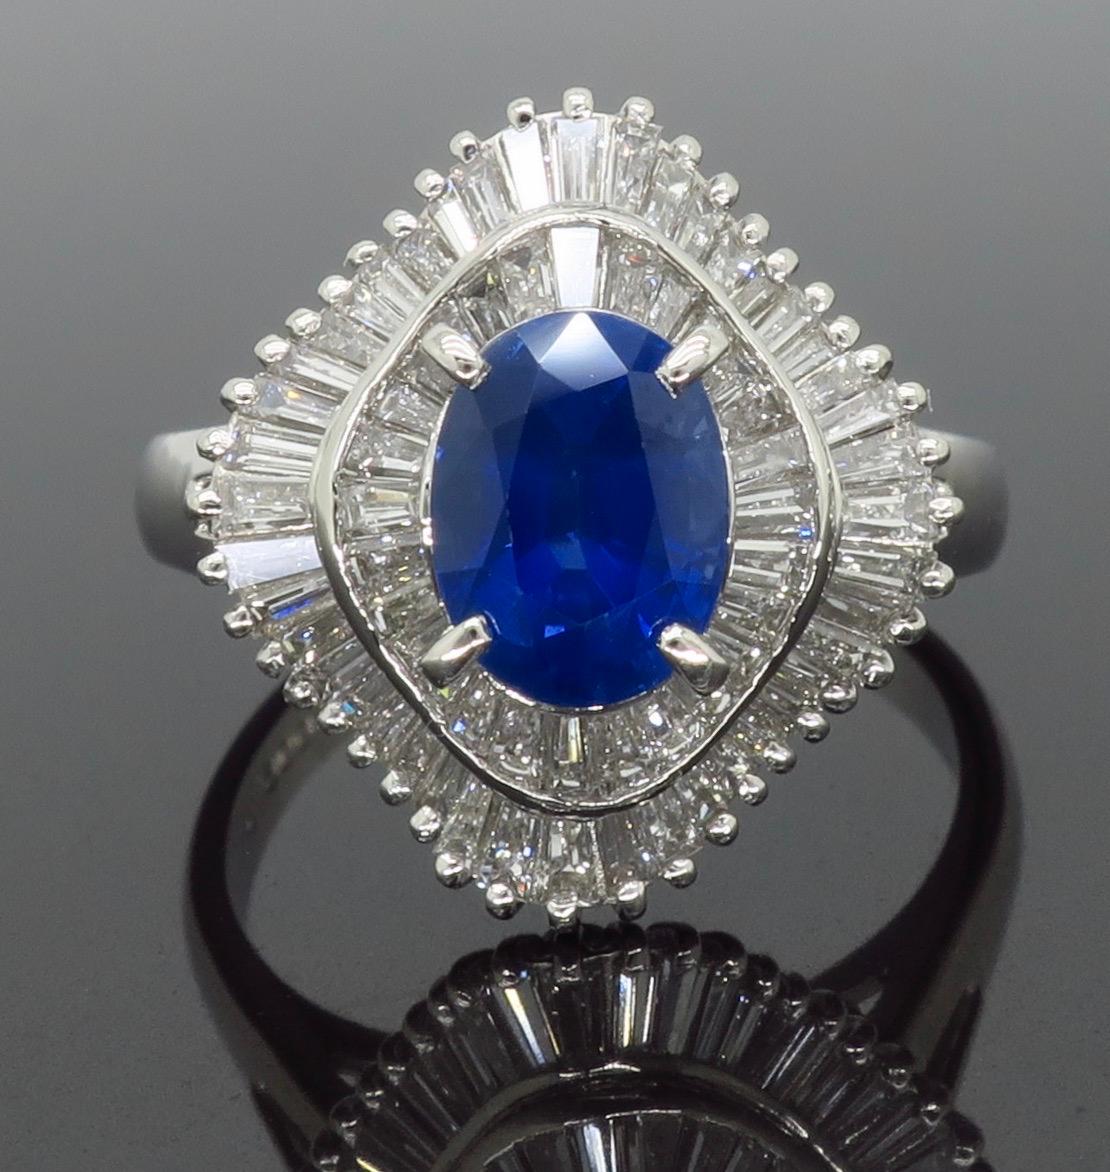 Ballerina style blue sapphire and diamond ring crafted in platinum.

Gemstone: Sapphire & Diamonds
Gemstone Carat Weight:  Approximately 1.318CT
Diamond Carat Weight:  Approximately .93CTW
Diamond Cut: Tapered Baguette Cut
Color: Average